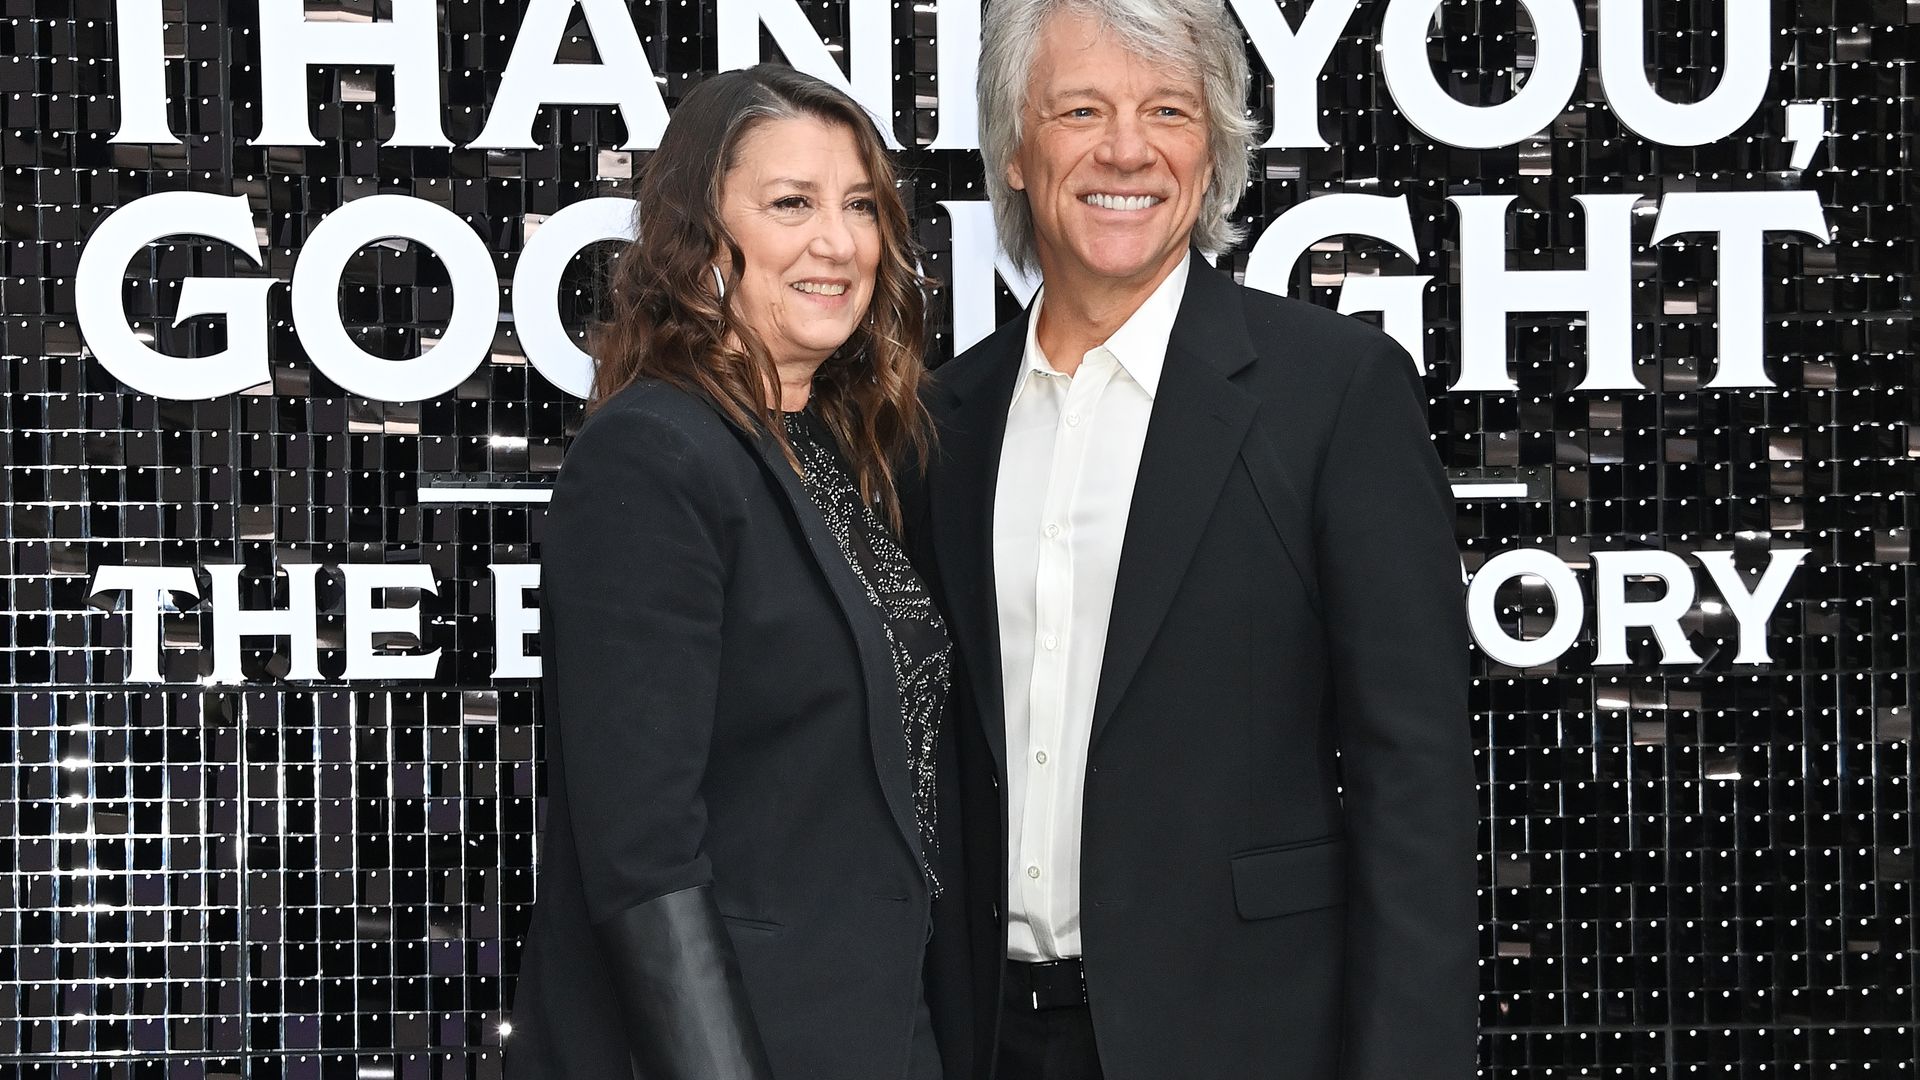 All about Jon Bon Jovi's marriage to Dorothea: from Las Vegas elopement to surviving daughter's overdose